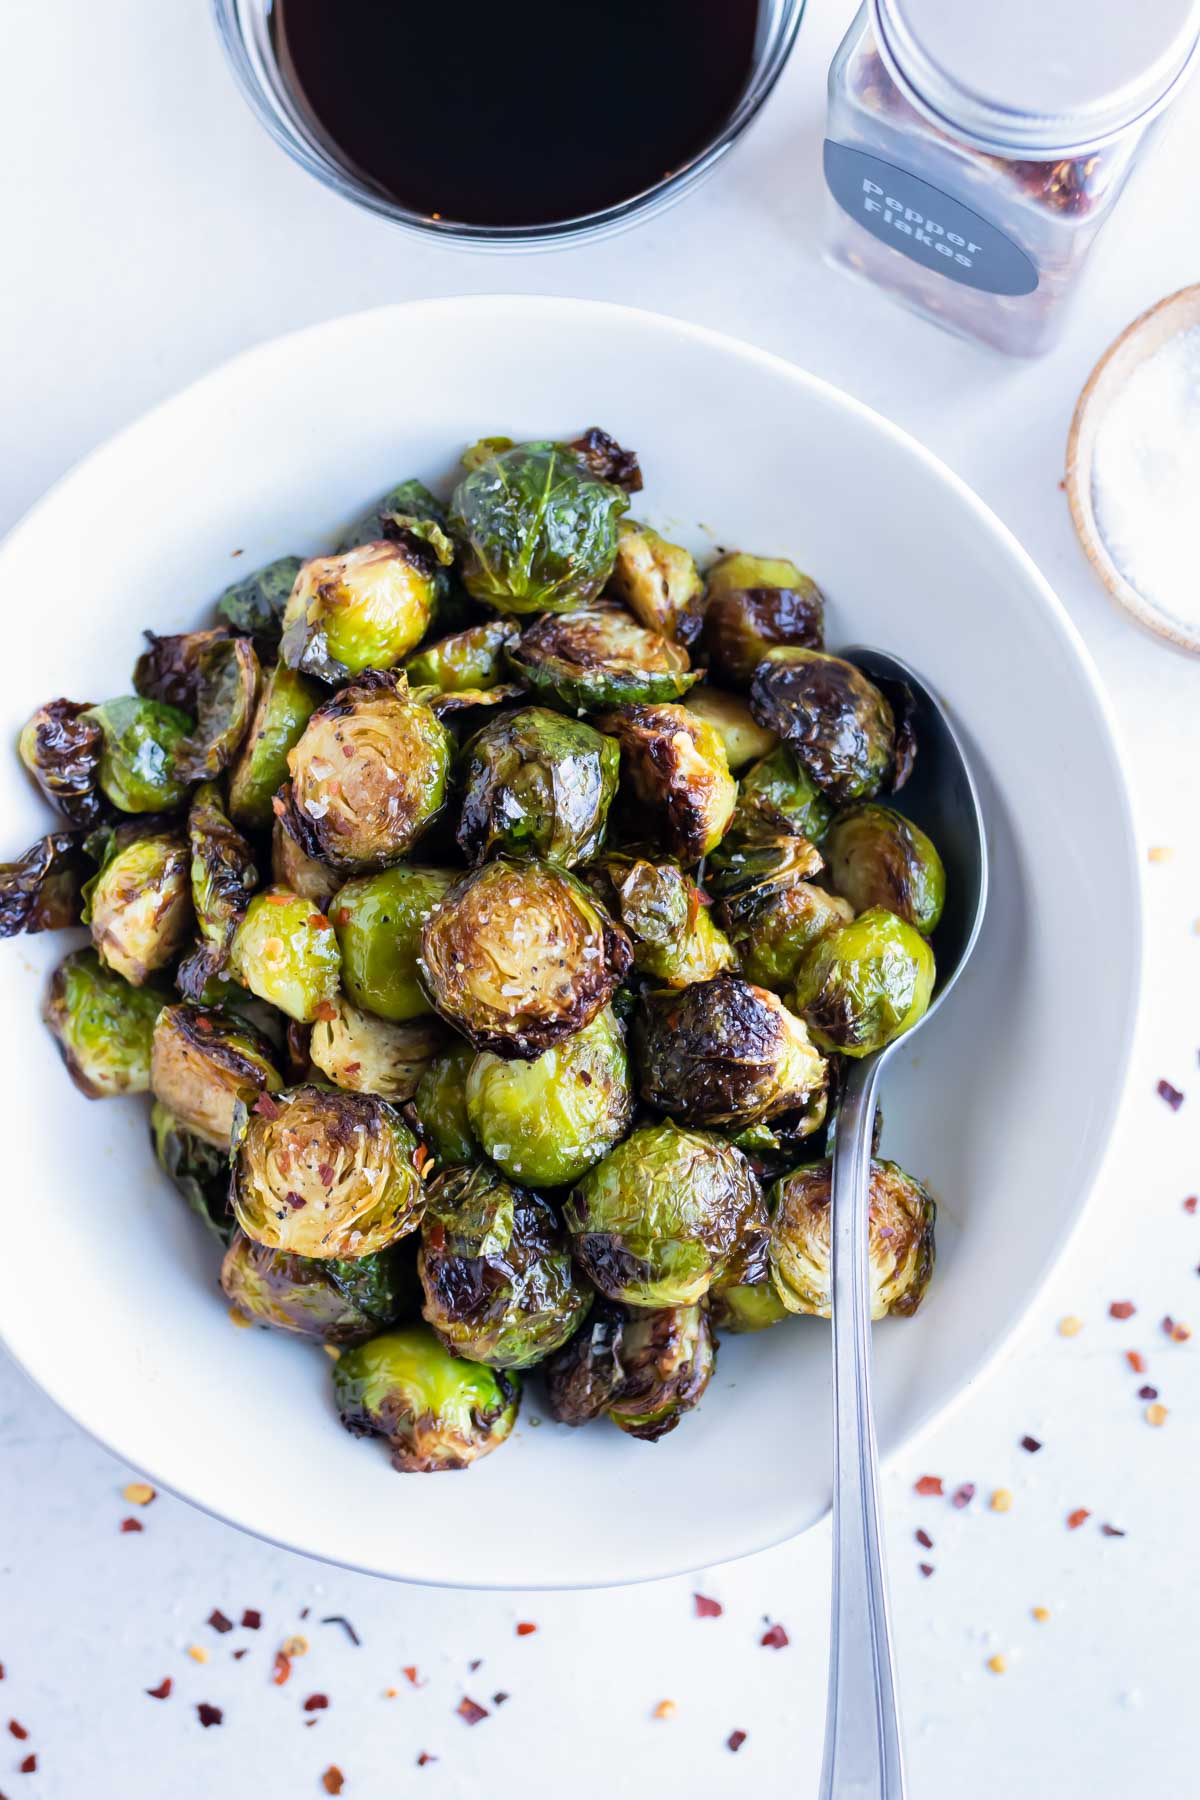 Air fryer brussels sprouts are served in white bowl for a vegetarian dish.